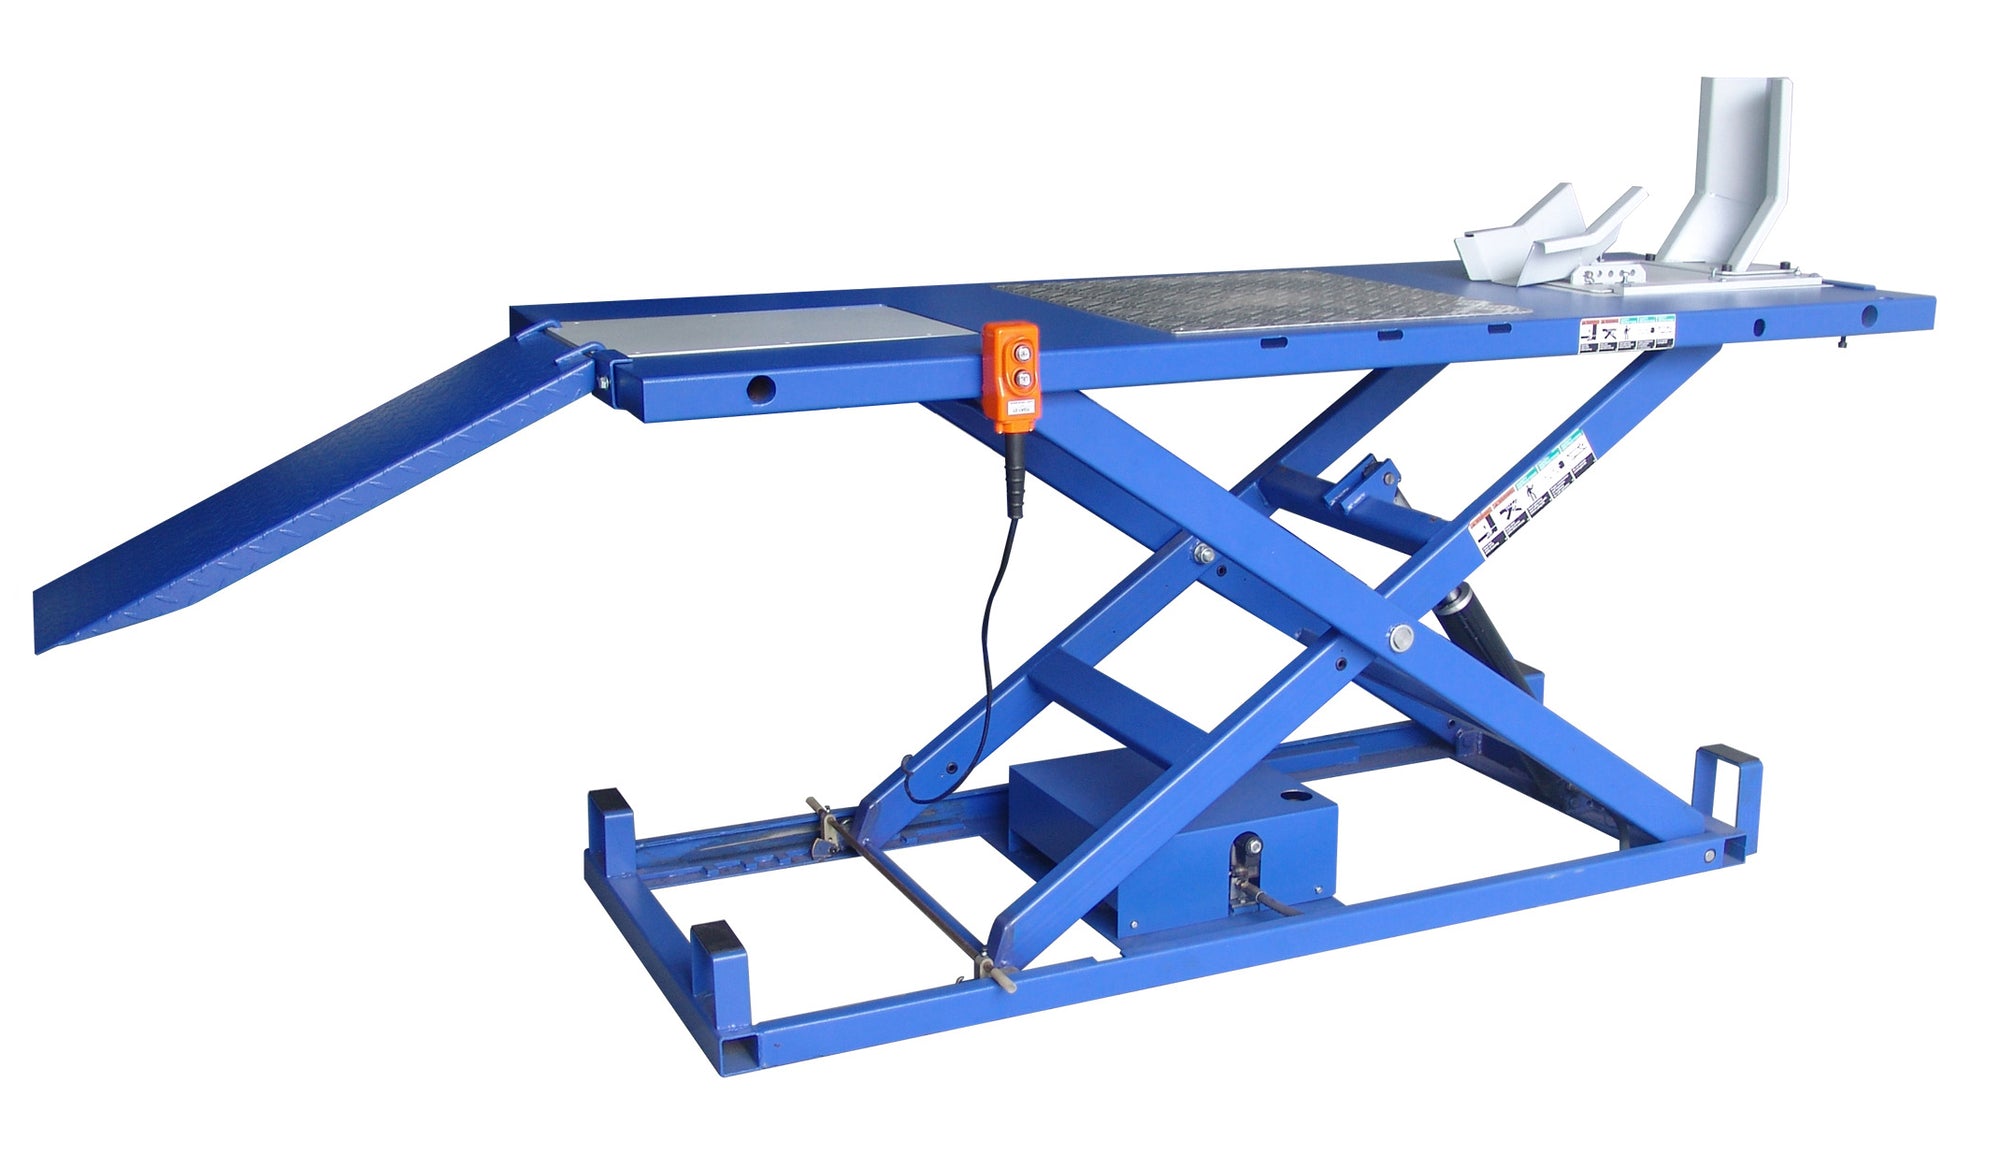 Hydraulic Motorcycle Hoist GIVE-AWAY by AAQ, valued at $2,999